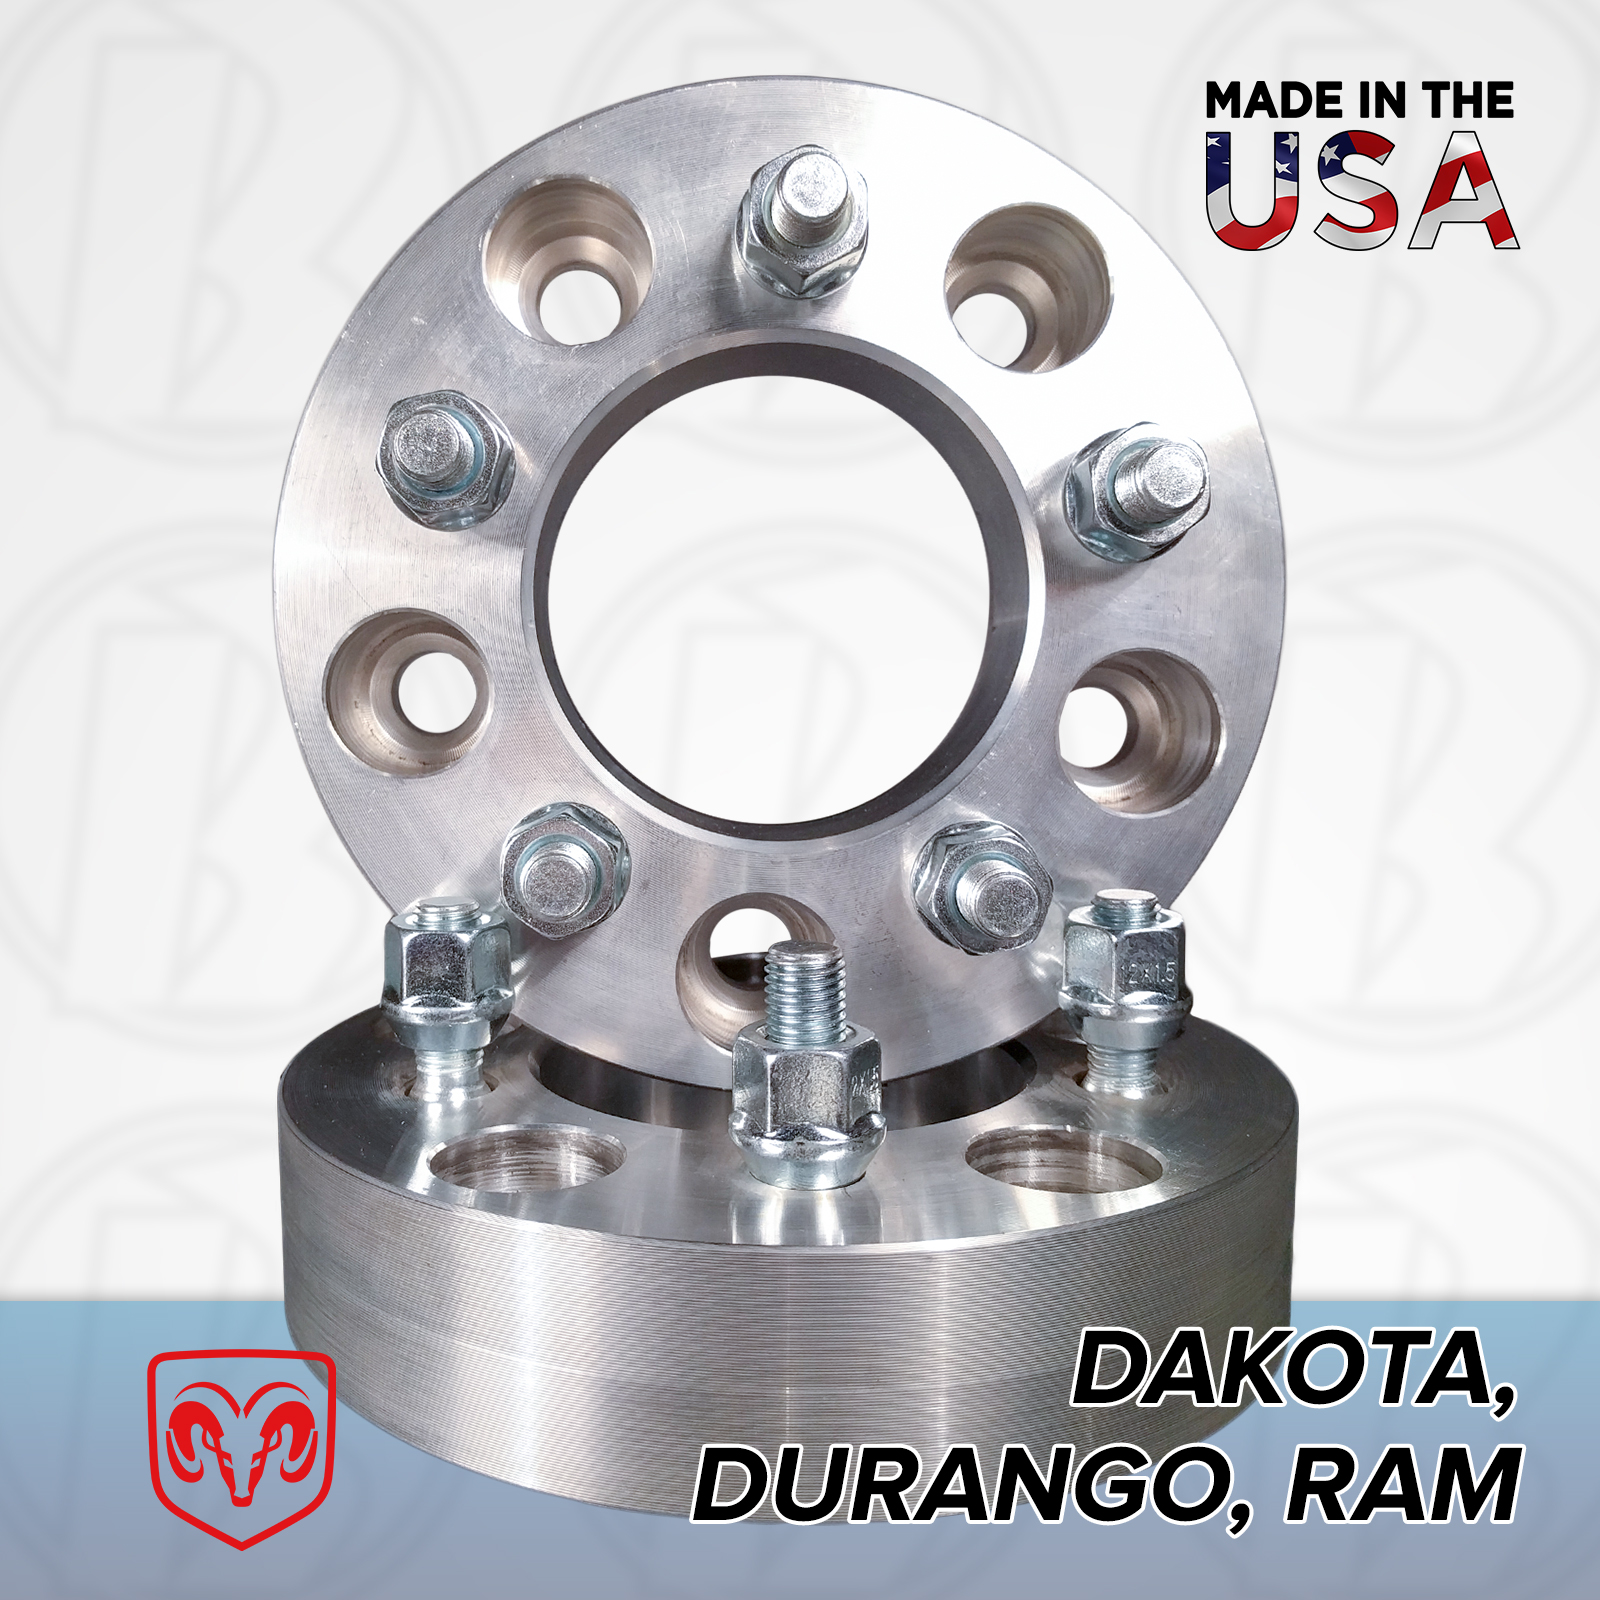 5x5.5 Dodge To 5x4.75 Wheel Adapters / 1" Spacers